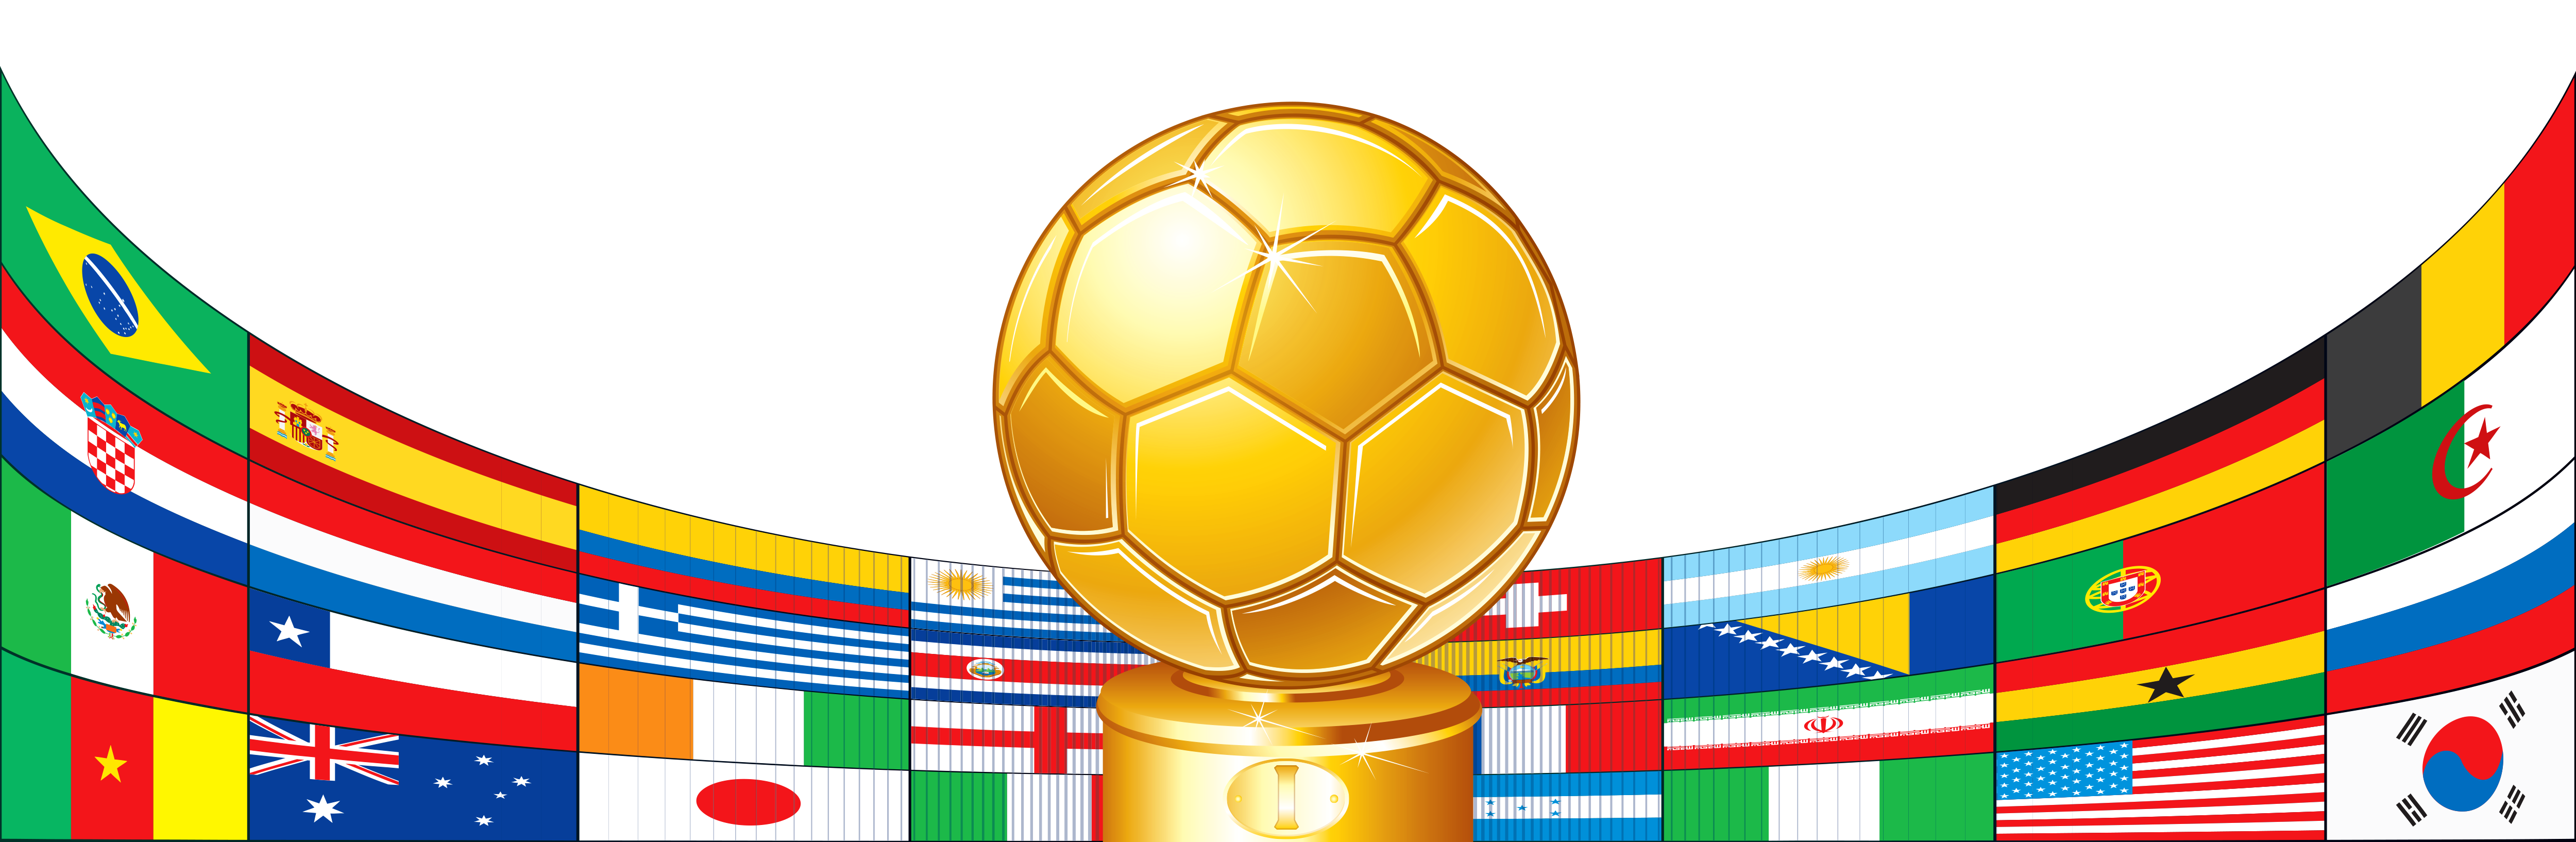 world cup 2014 clipart - photo #3